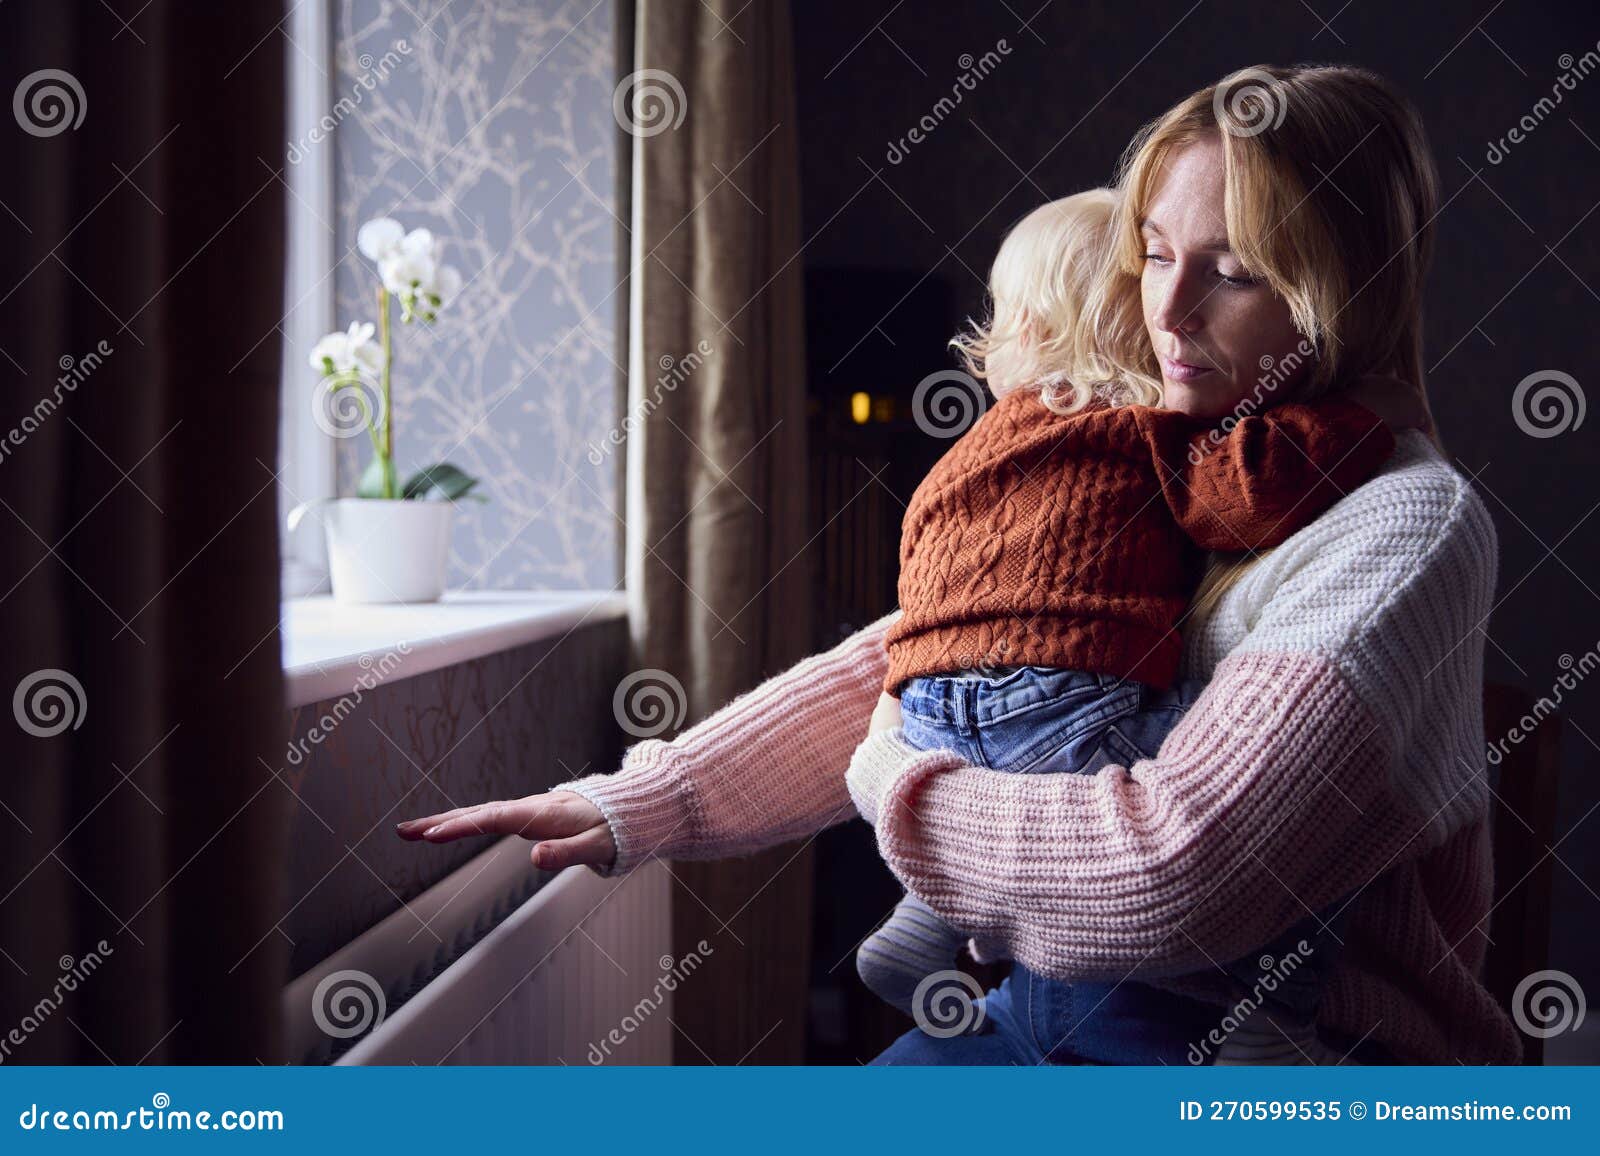 mother with son trying to keep warm by radiator at home during cost of living energy crisis